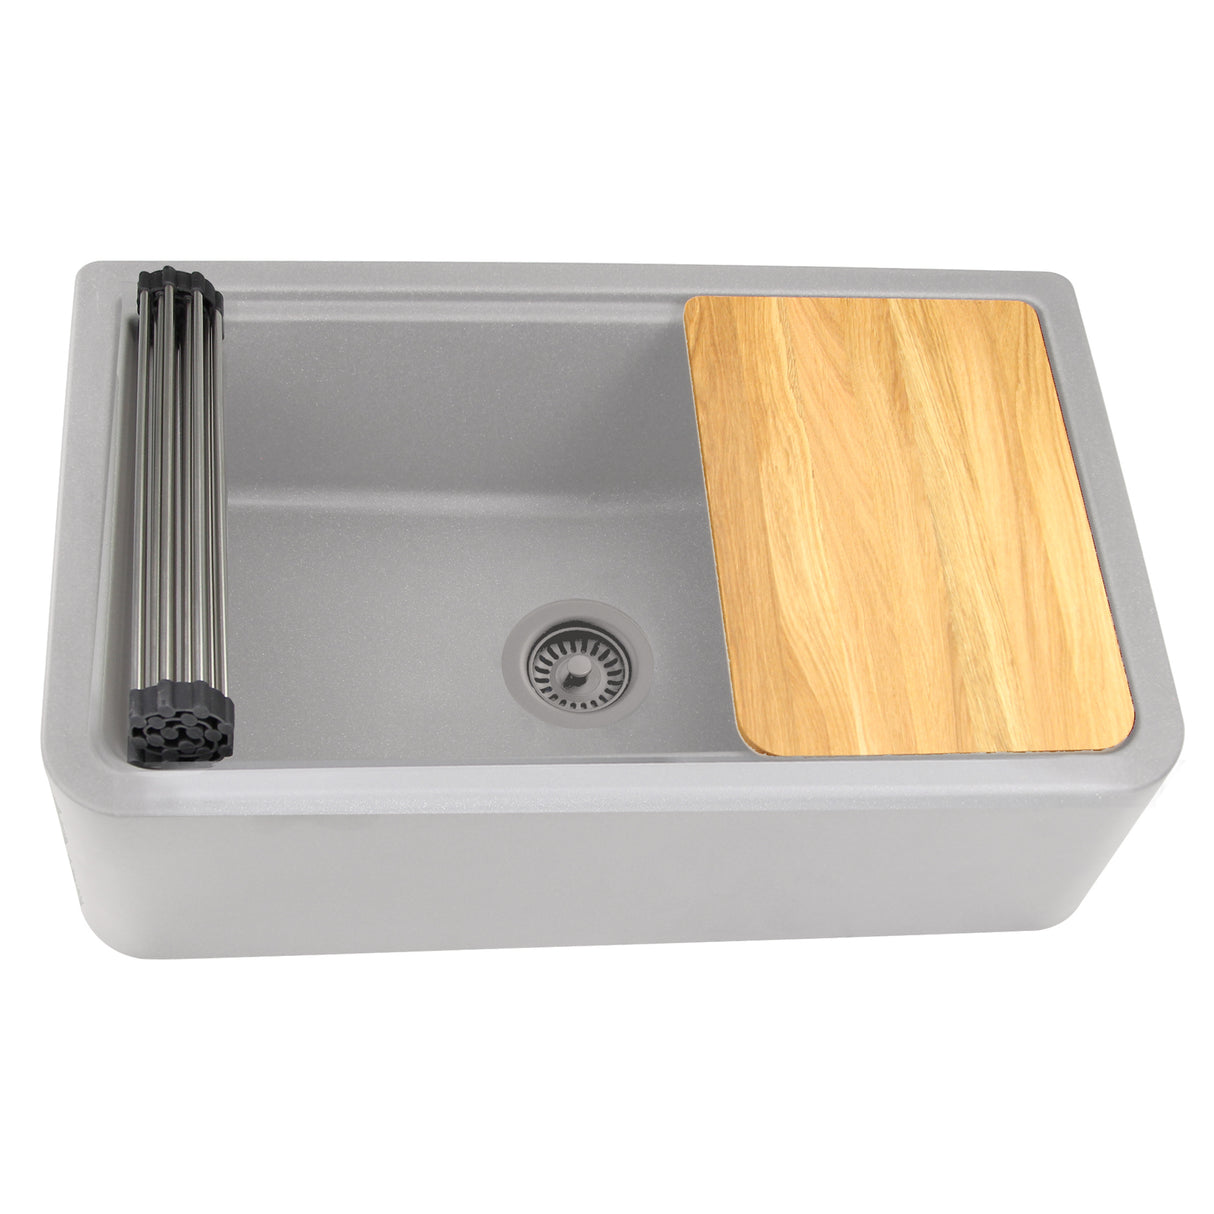 Nantucket Sinks 33-inch Reversible Workstation Granite Composite Apron Sink with Accessory Pack